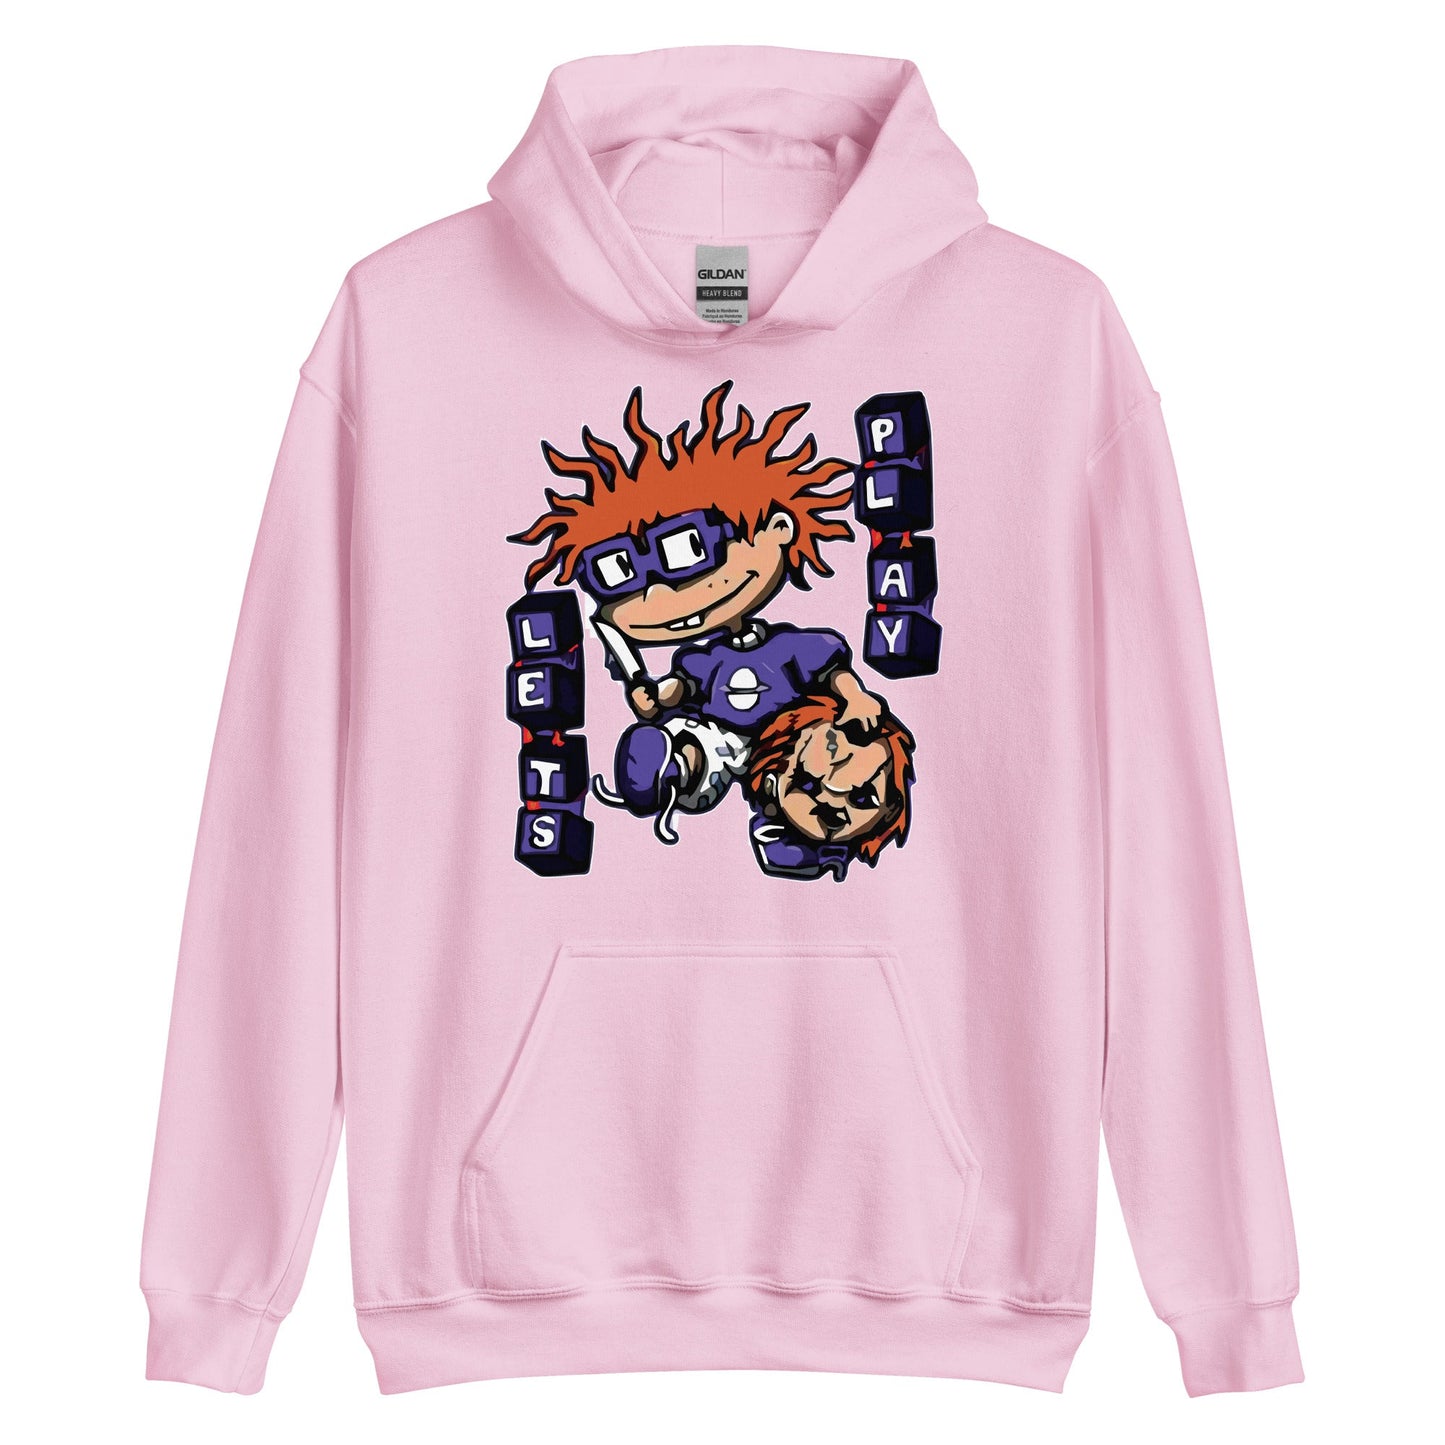 lets play Chuckie Finster holding chucky head hoodie - The Truth Graphics